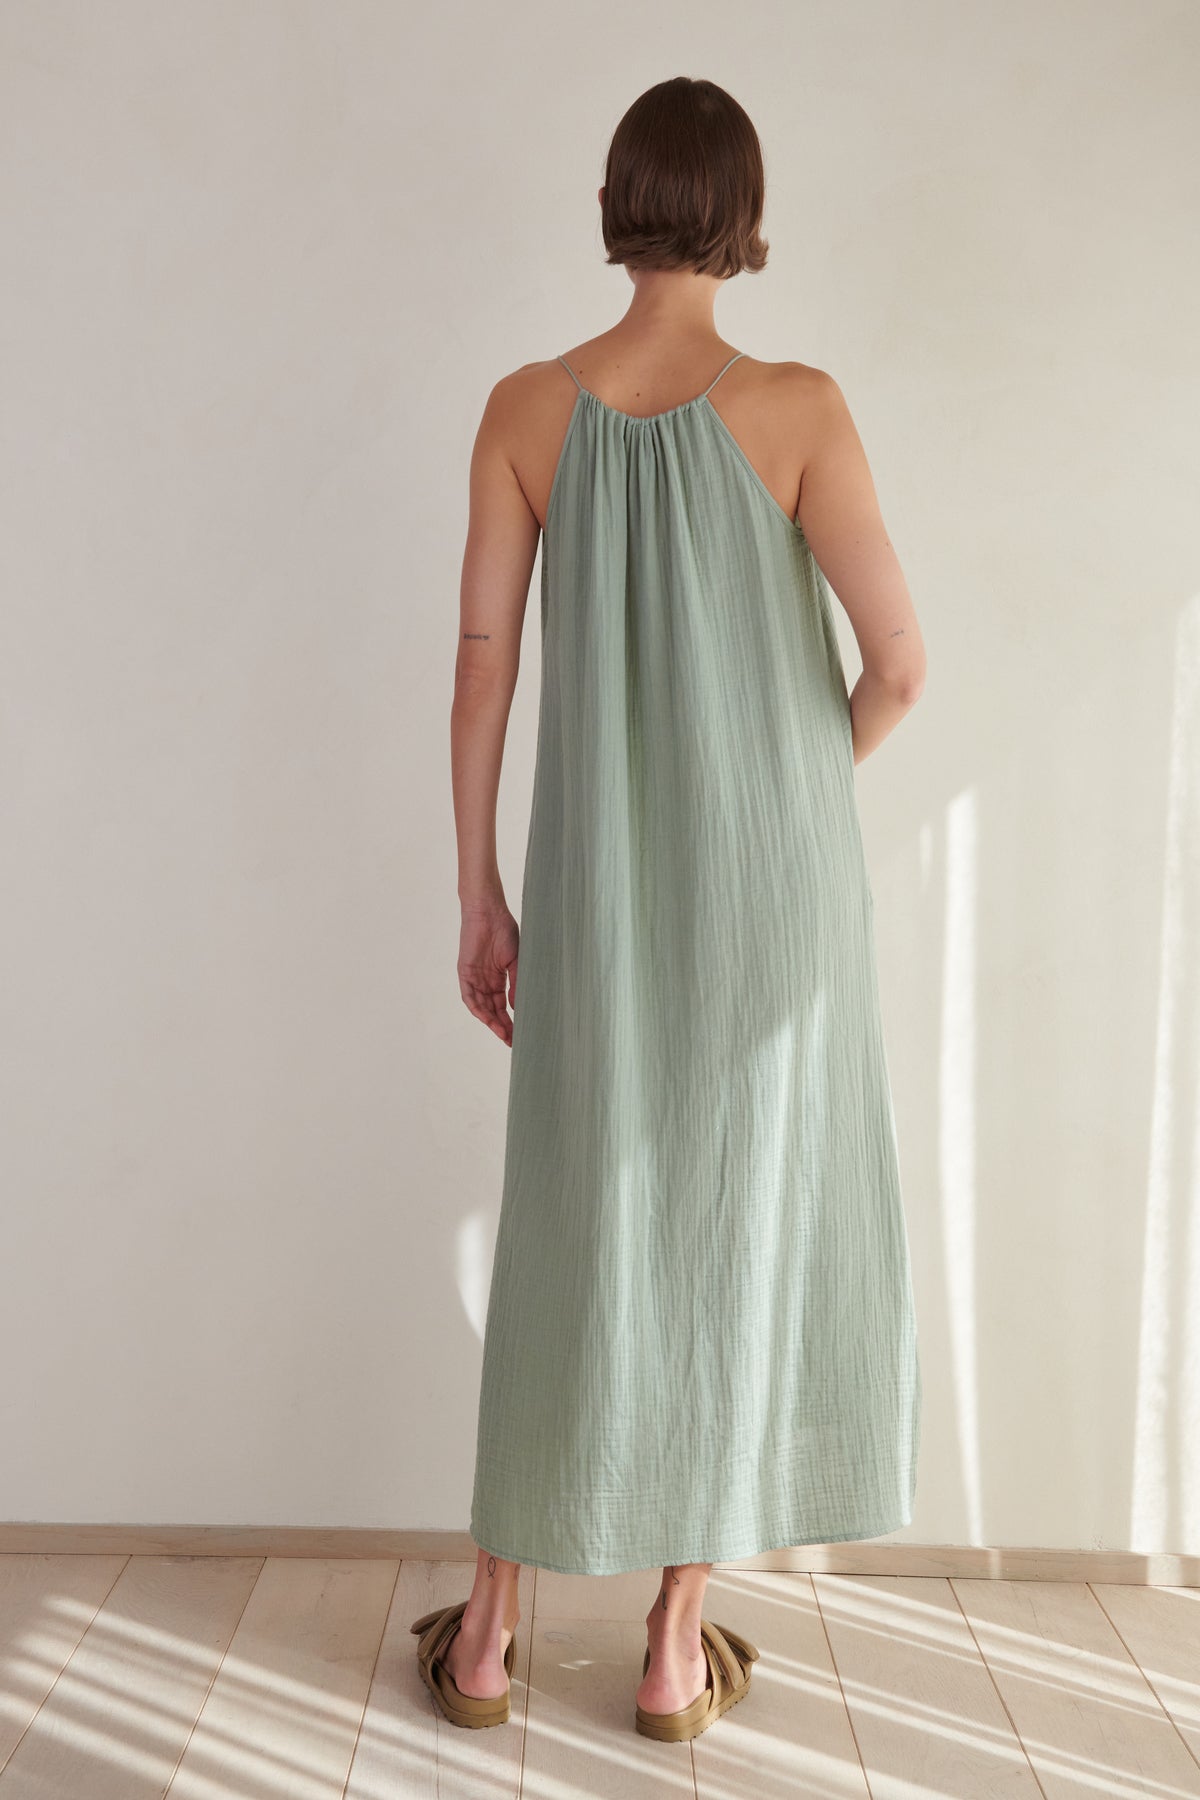 Woman standing in a sunlit room, wearing a long, light green cotton gauze Carrillo dress by Velvet by Jenny Graham with thin straps, facing away from the camera.-26293219918017